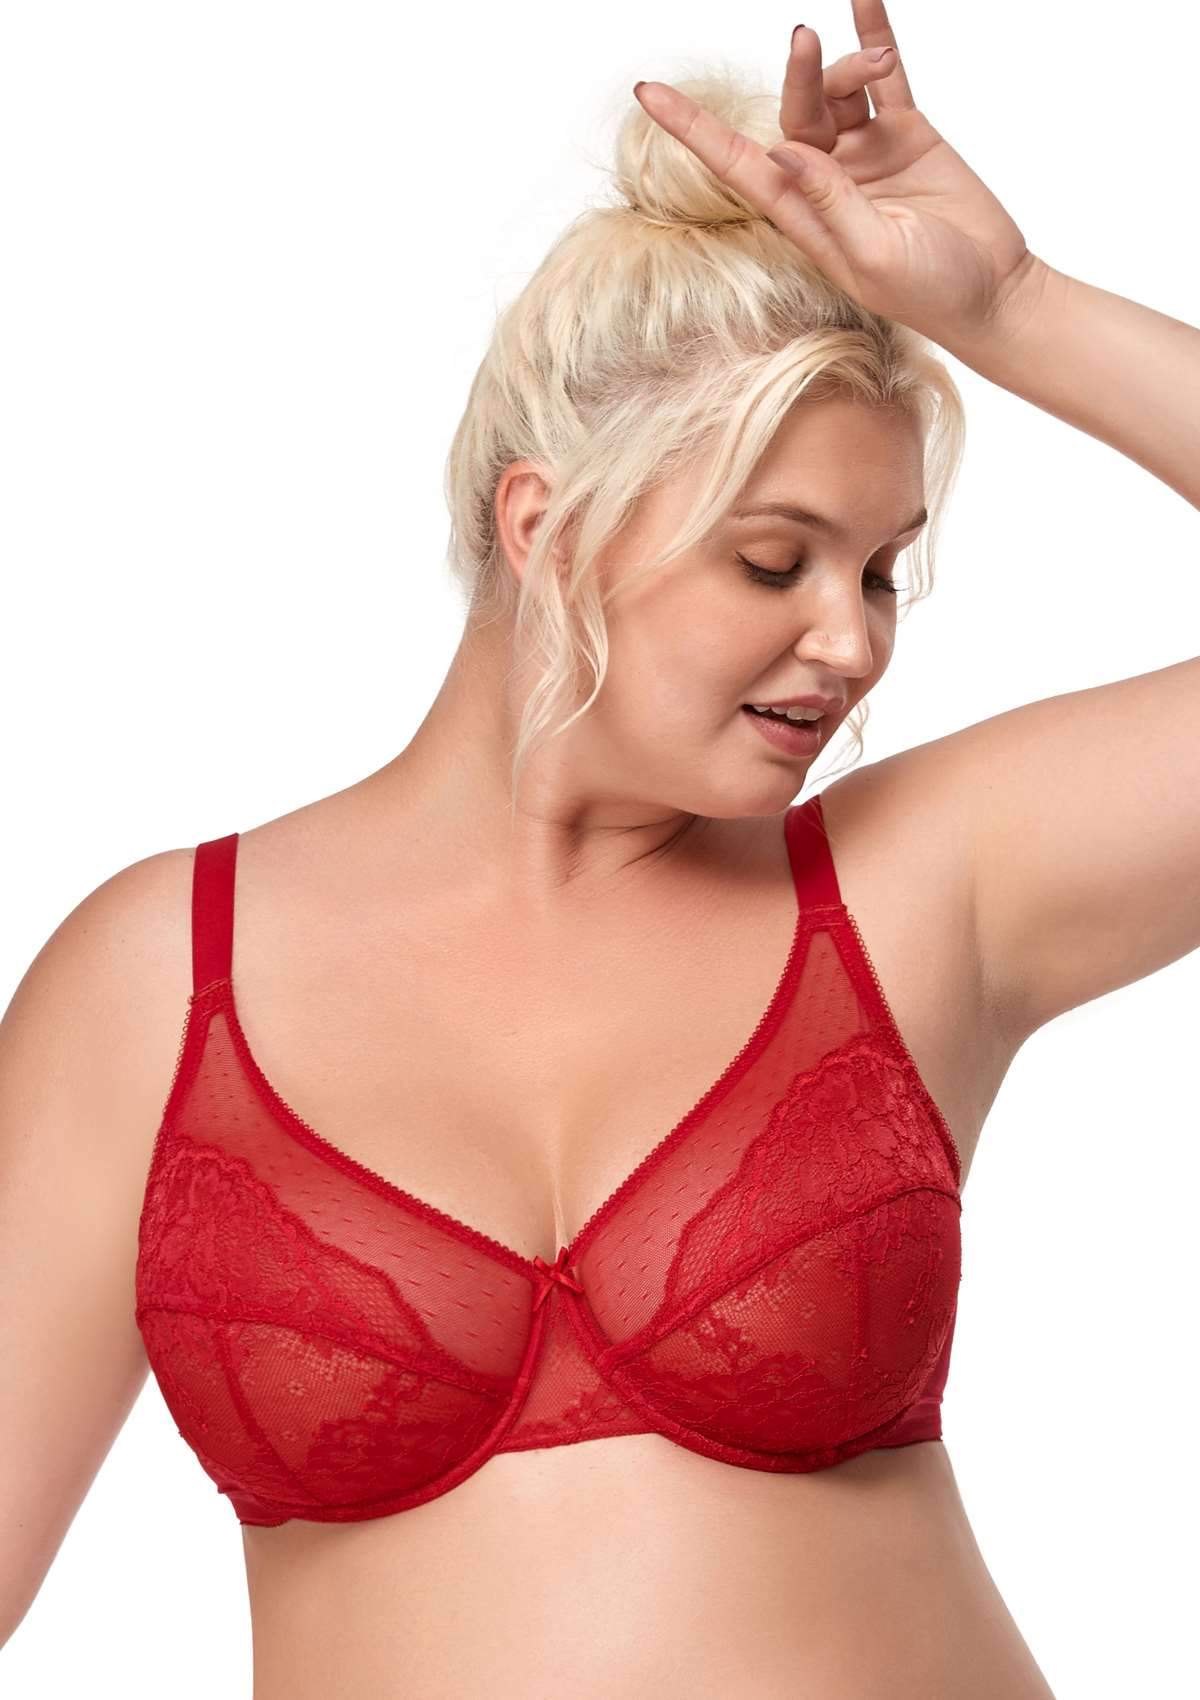 HSIA Enchante Full Support Lace Underwire Bra: Ideal For Big Breasts - Crimson / 34 / D